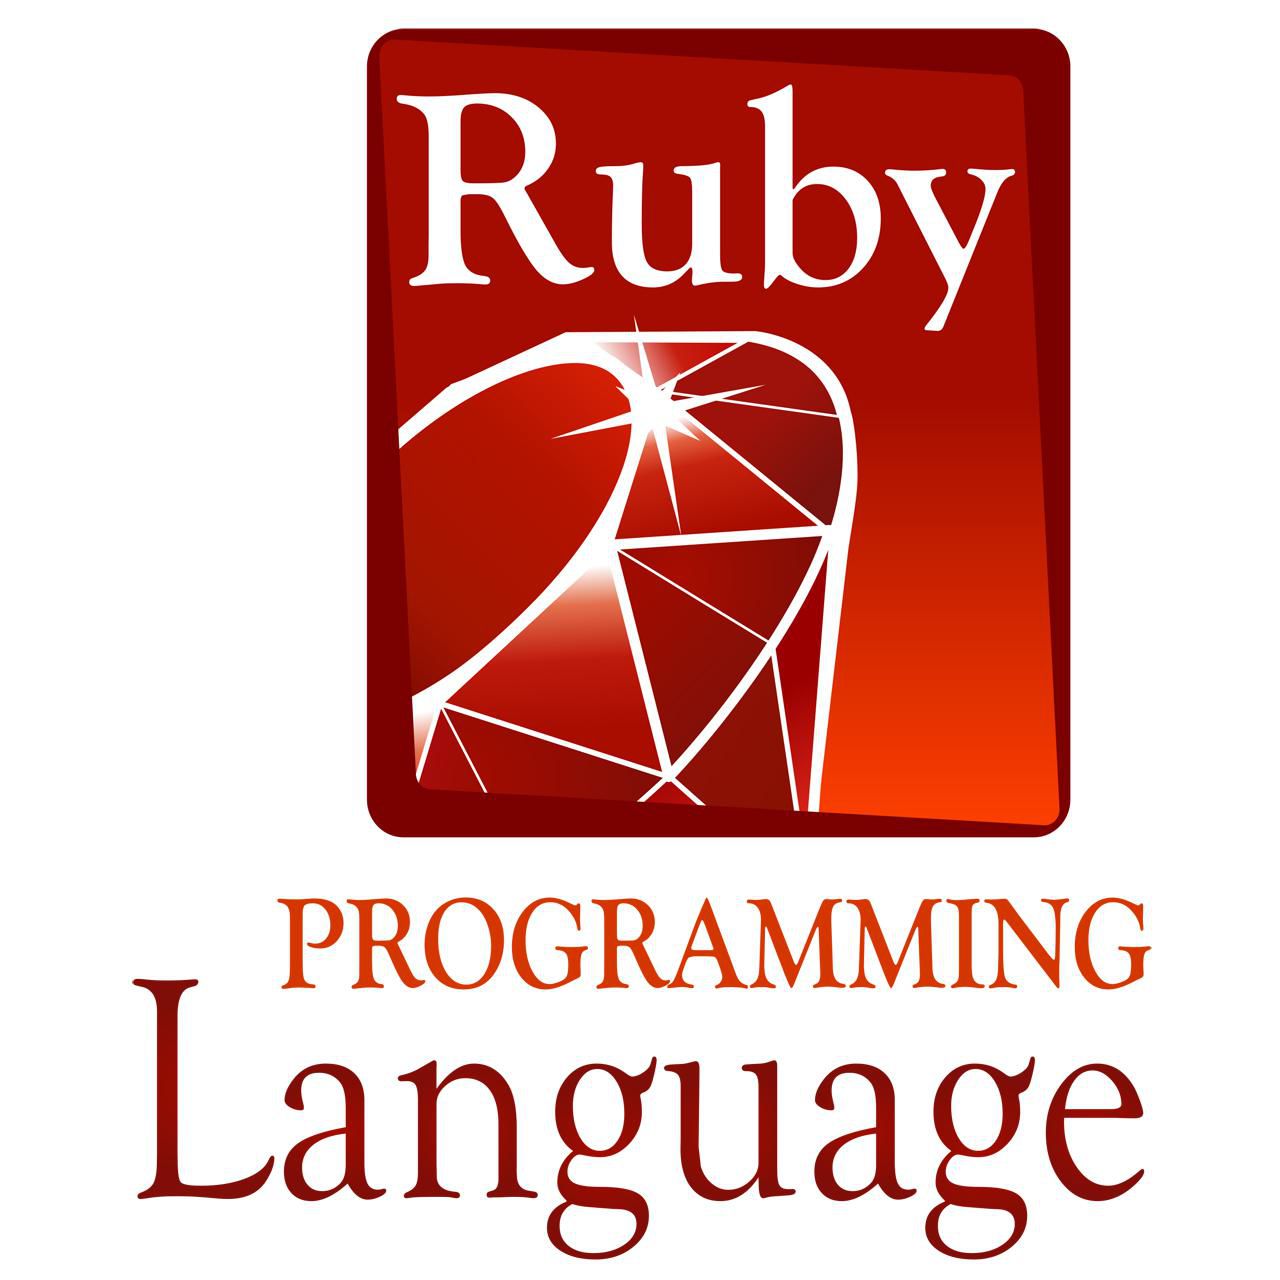 Ruby courses and tutorials